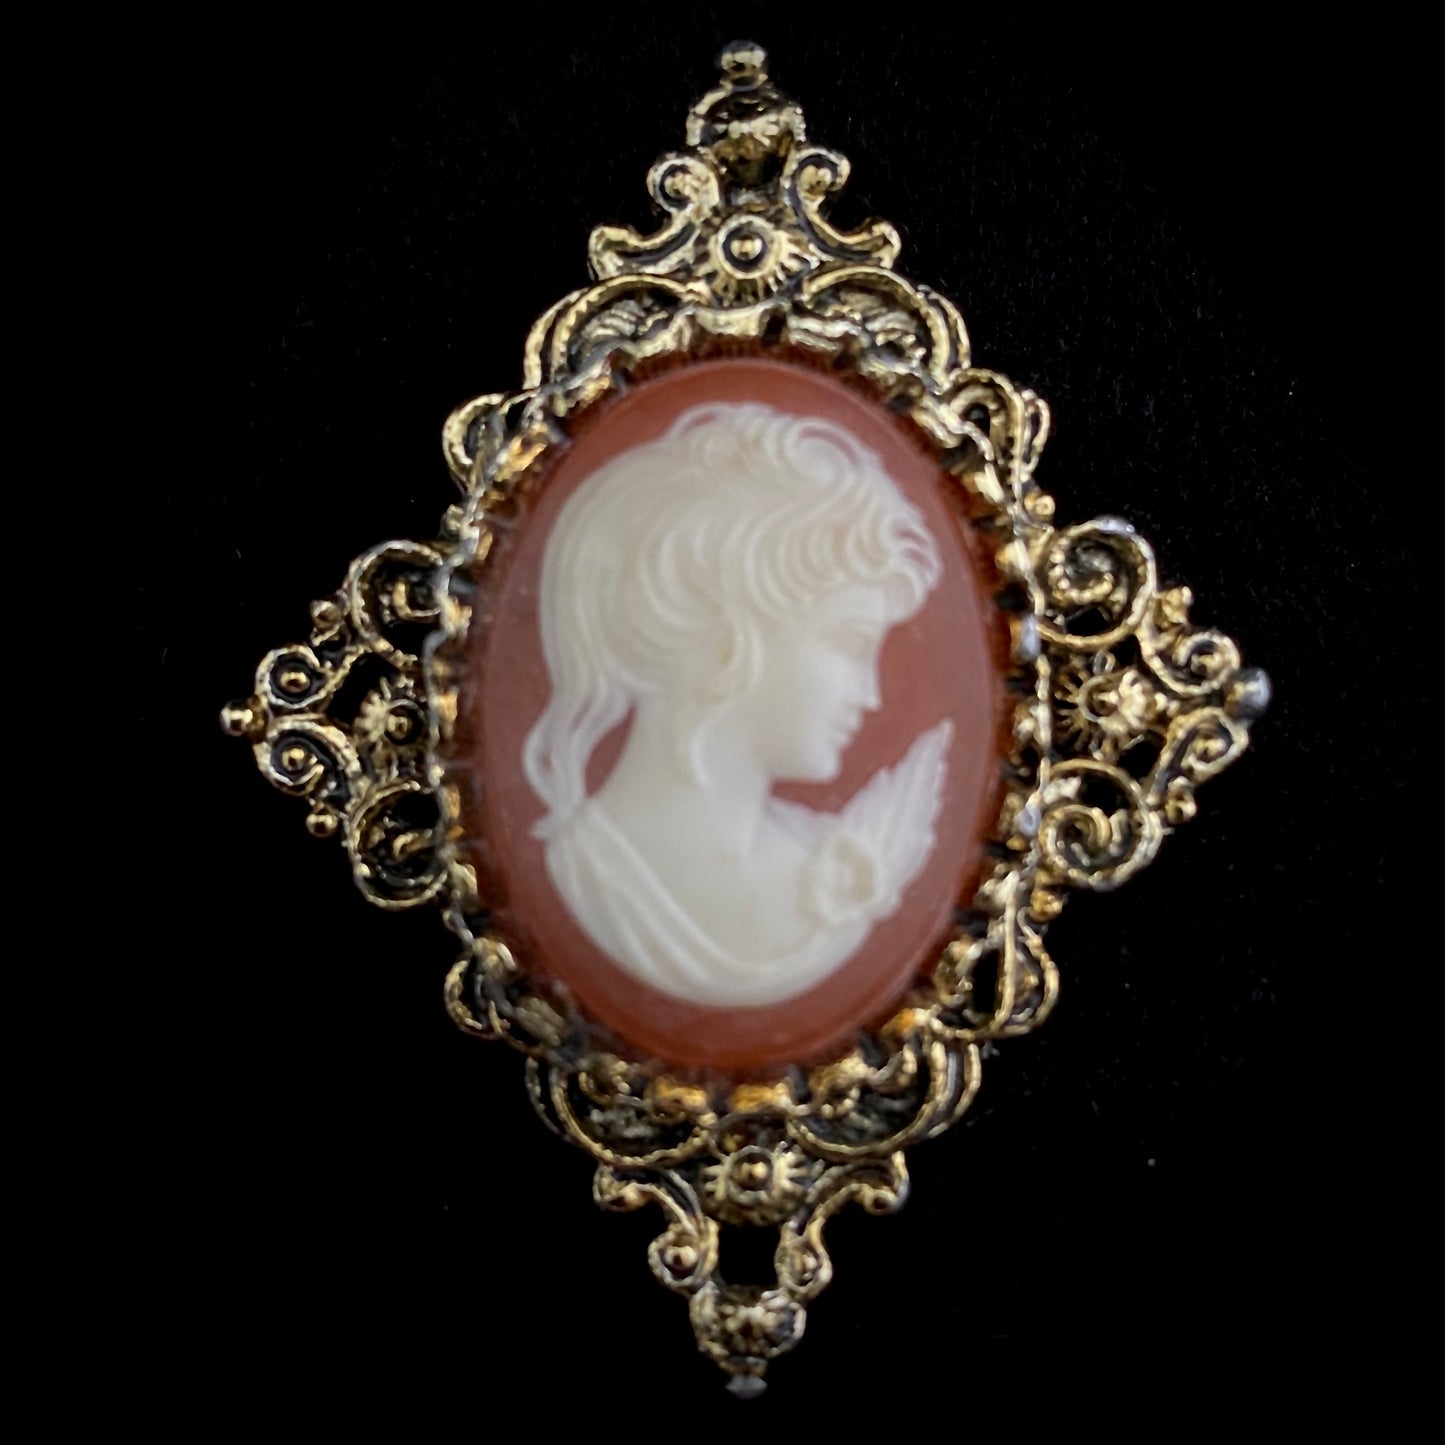 Late 70s/ Early 80s Gerry’s Cameo Brooch/Pendant - Retro Kandy Vintage